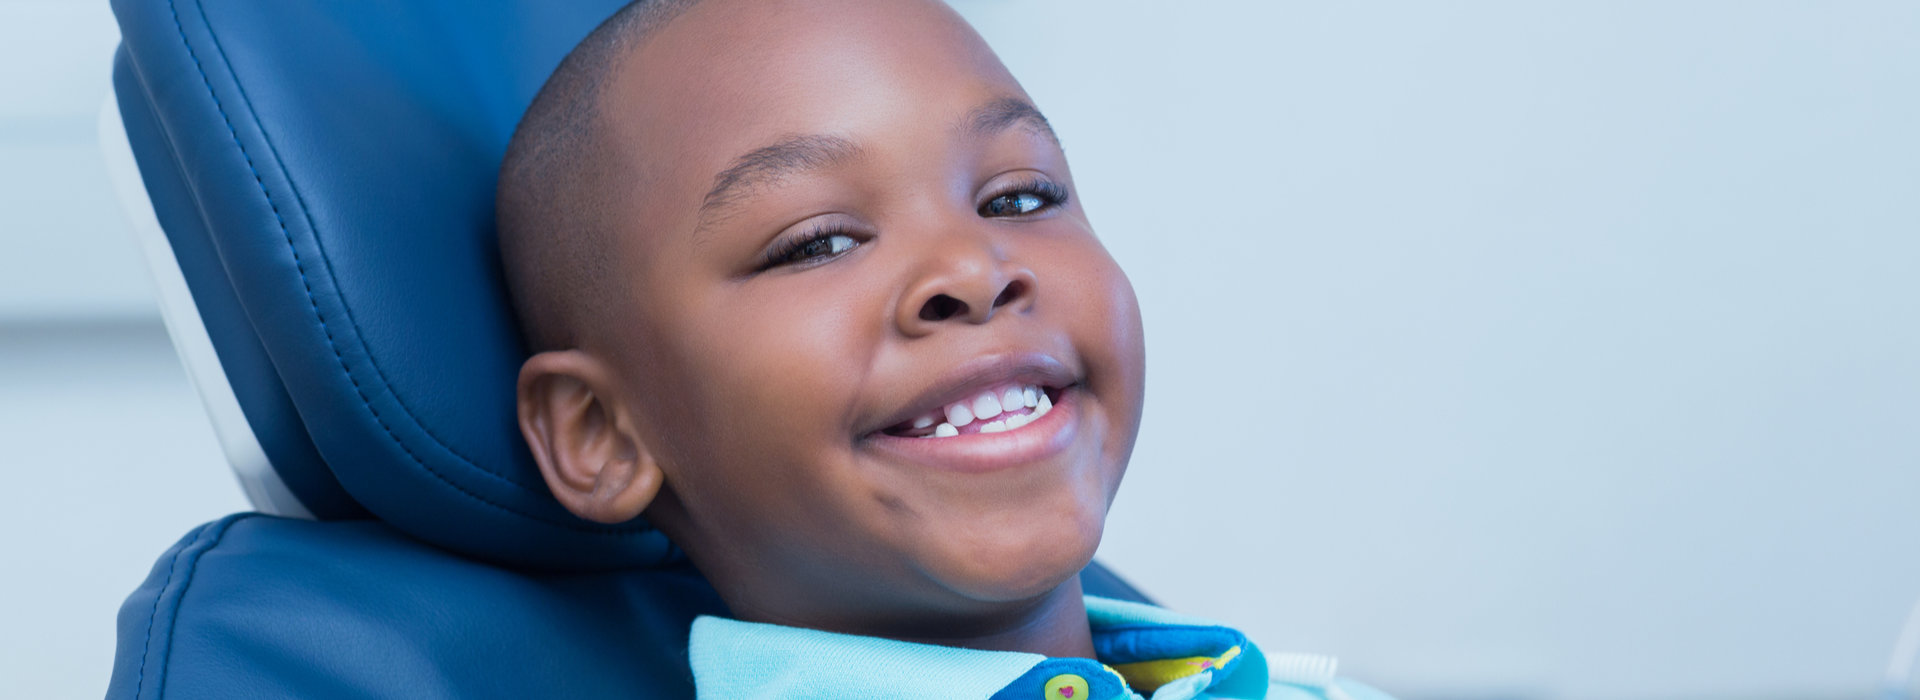 A child is smiling after Restorative Care.